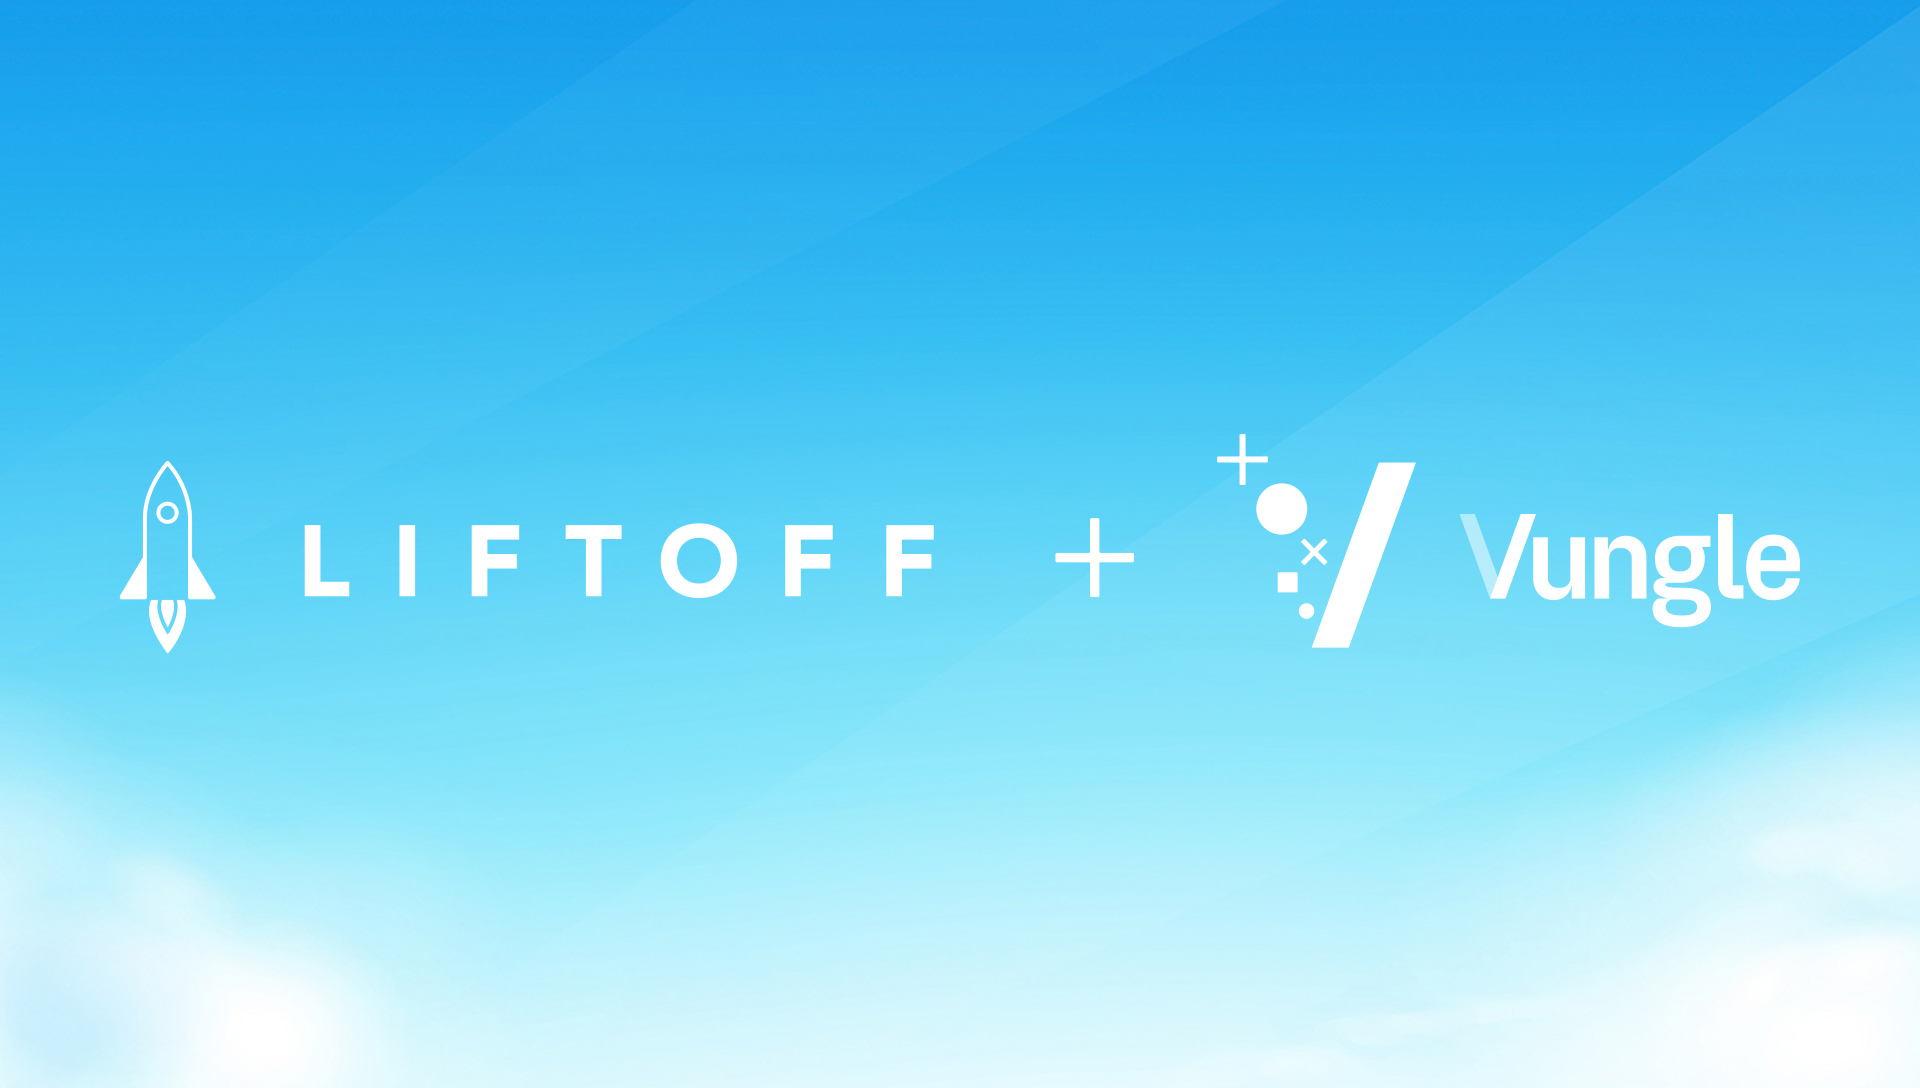 Liftoff and Vungle Join Forces to Form Leading Independent Mobile Growth Platform